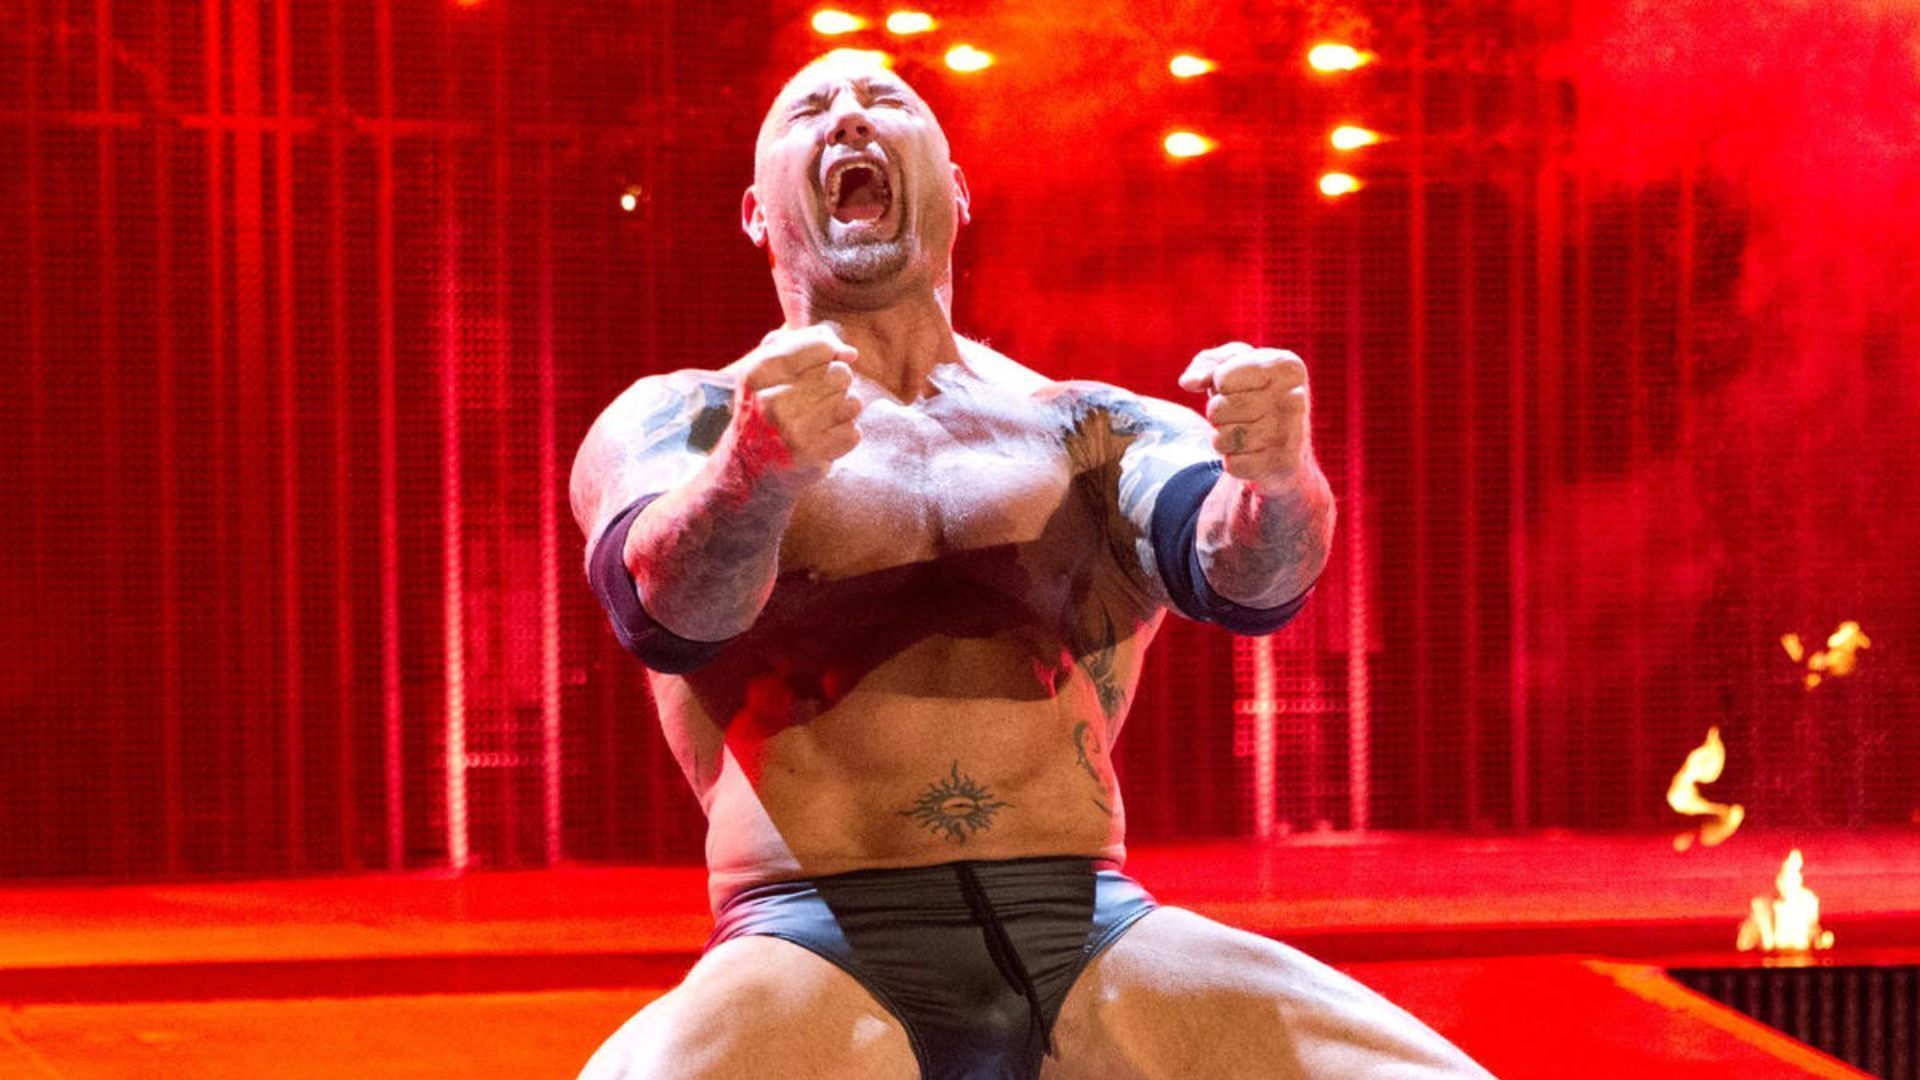 Batista was one of the most powerful athletes in WWE history